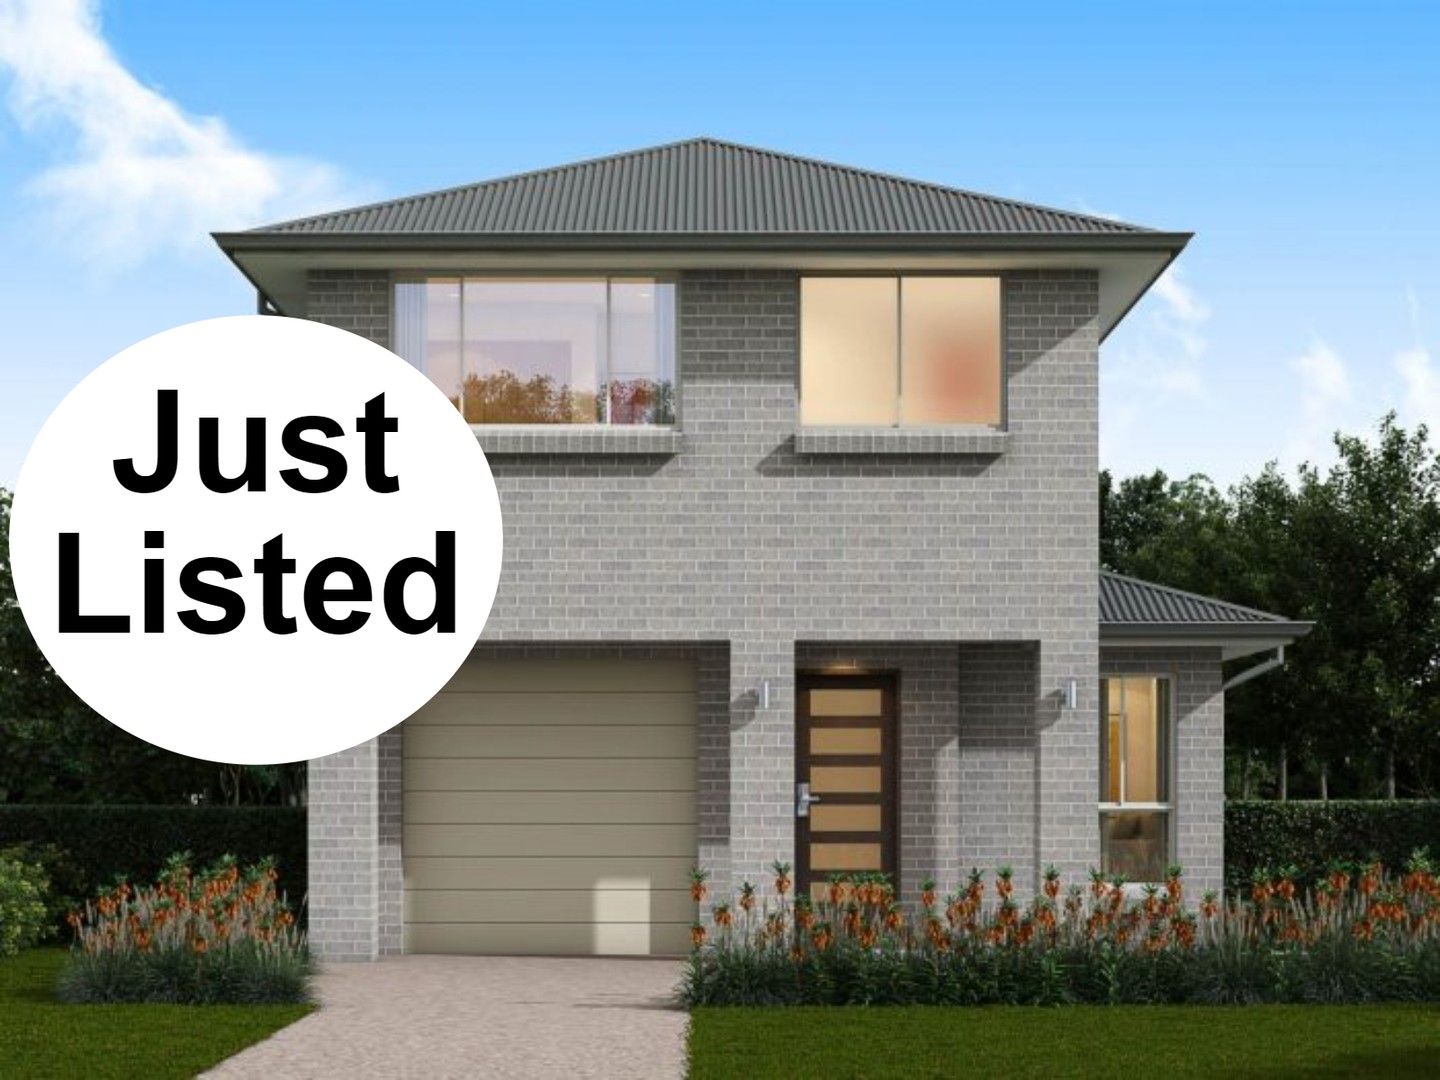 4 bedrooms House in WALK TO SCHOOL CALL NOW TO BOOK YOUR PRIVATE INSPECTION- Calleja Steet THE PONDS NSW, 2769